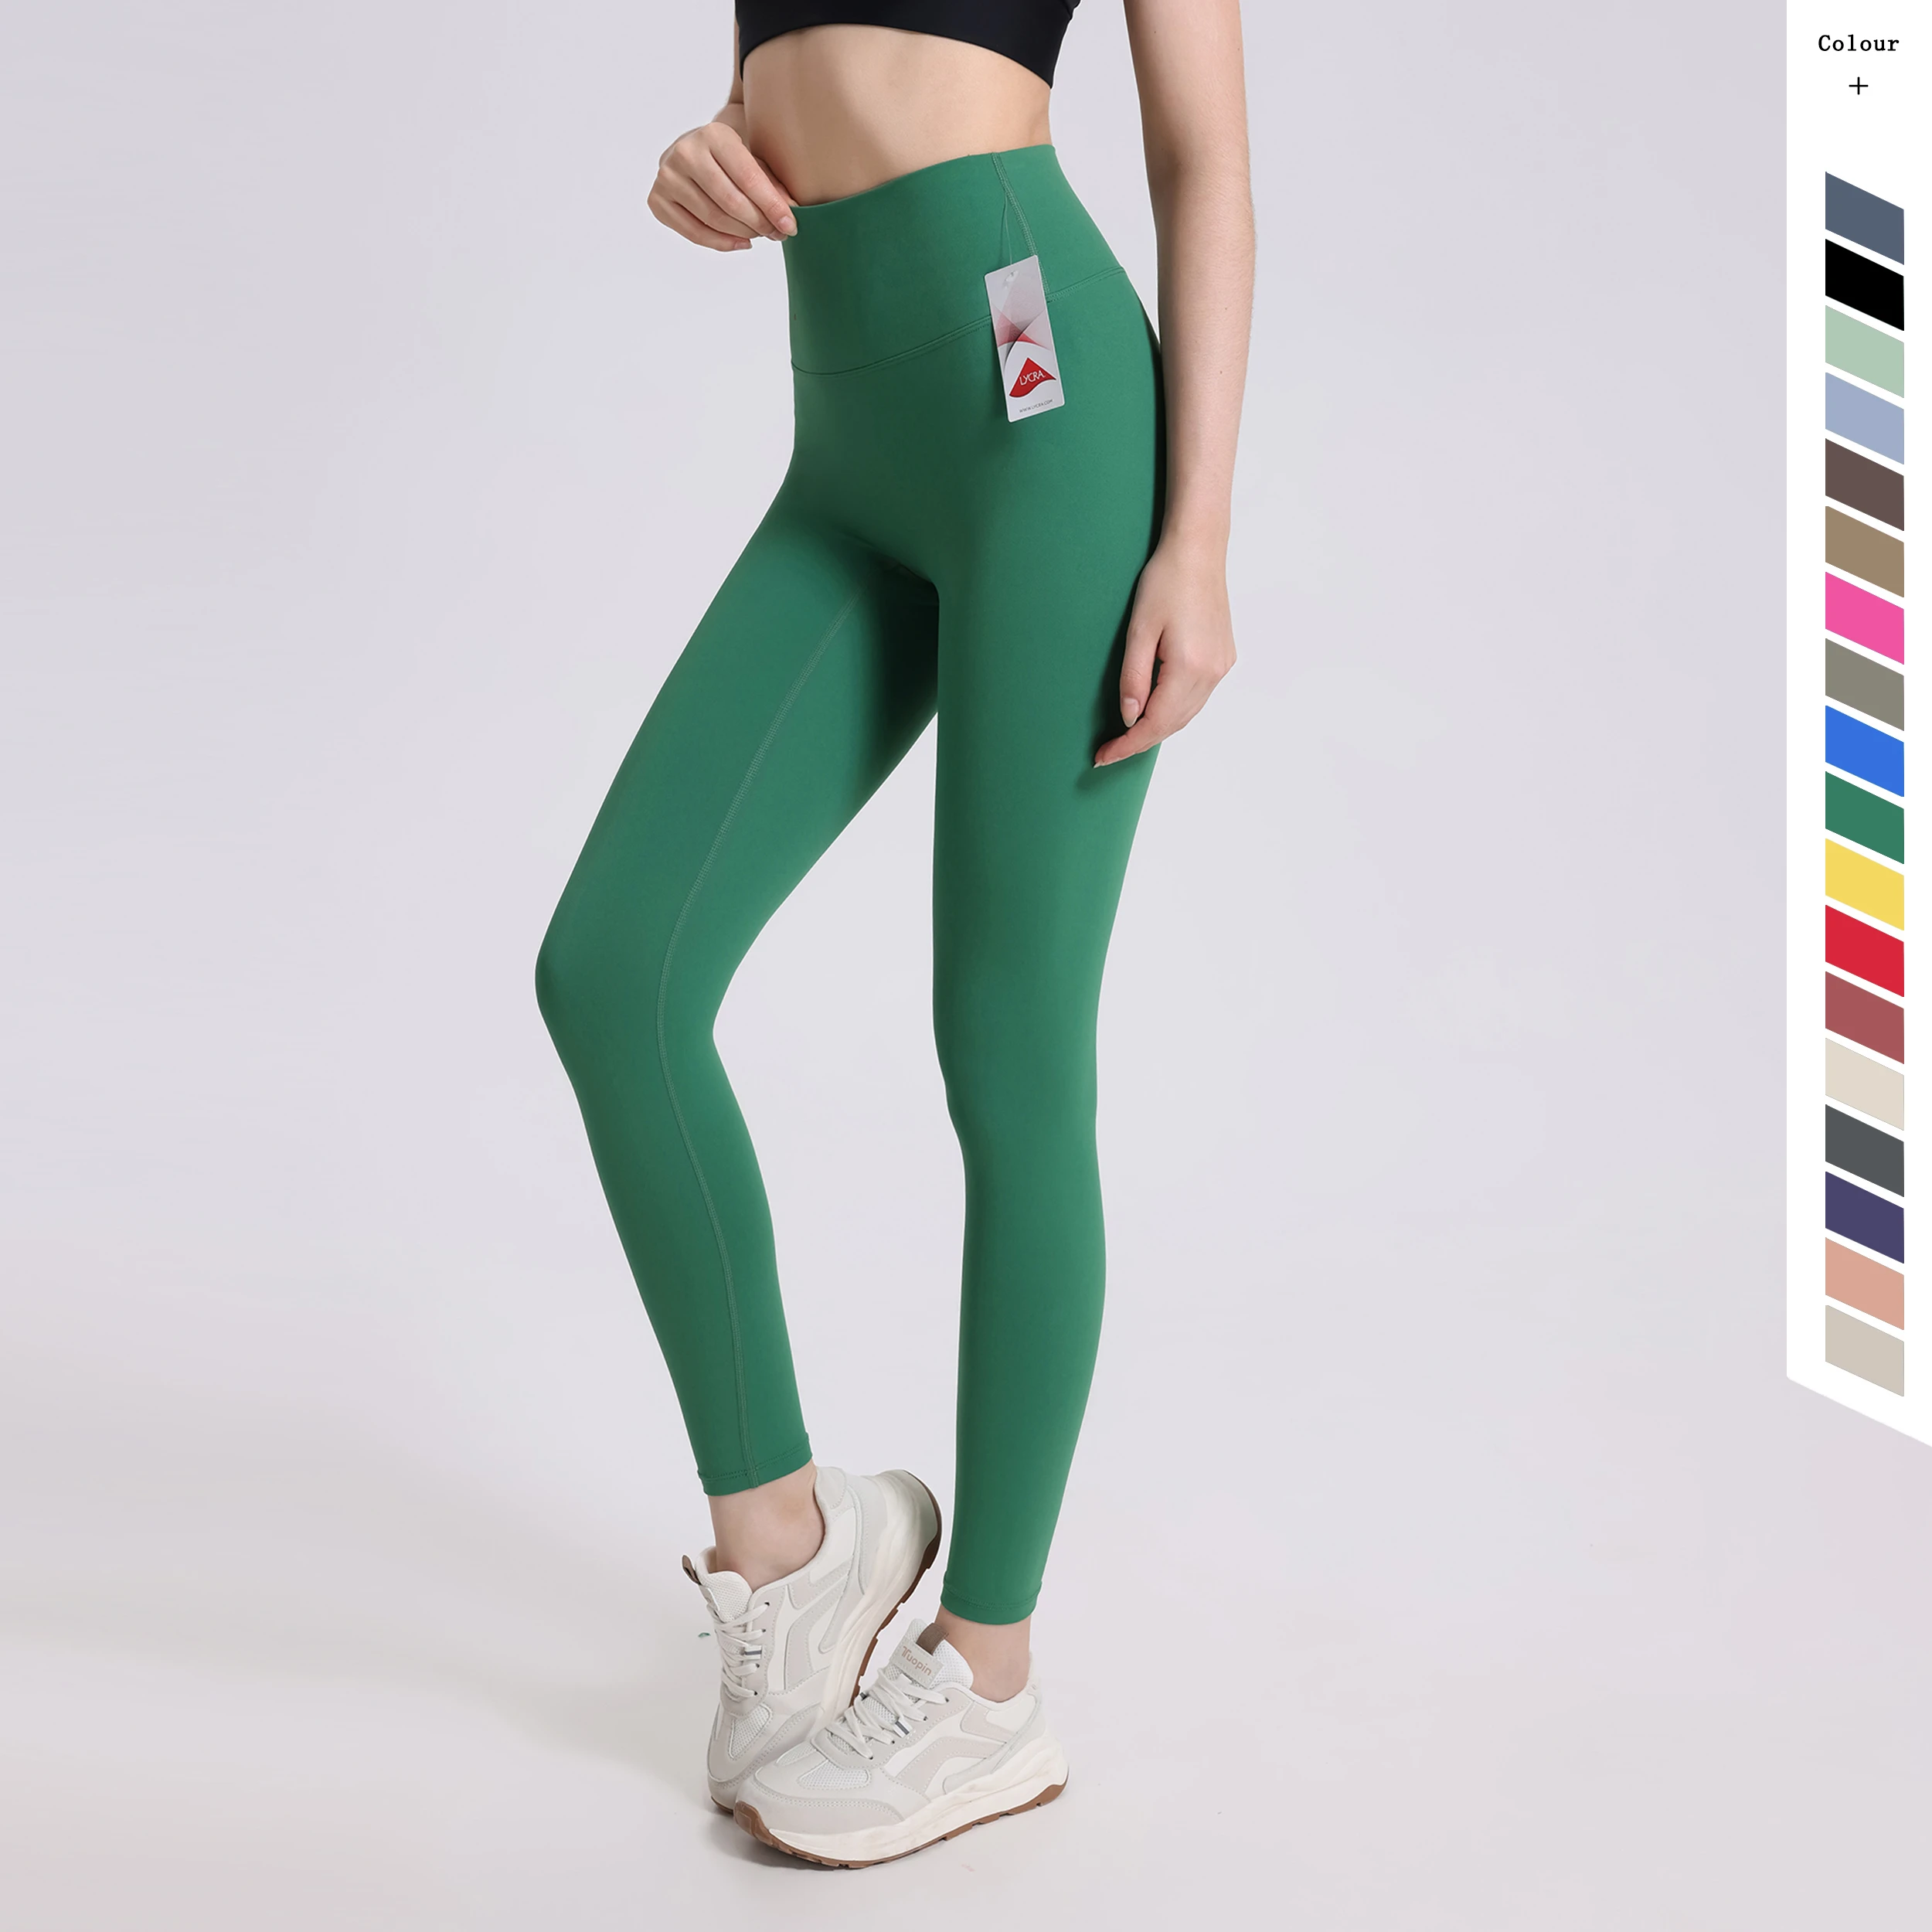 3.0 One-piece cutting Yoga Fitness Pants Soft Naked-Feel Sport Yoga Pants High Waist Gym Jogging Fitness Athletic Legging